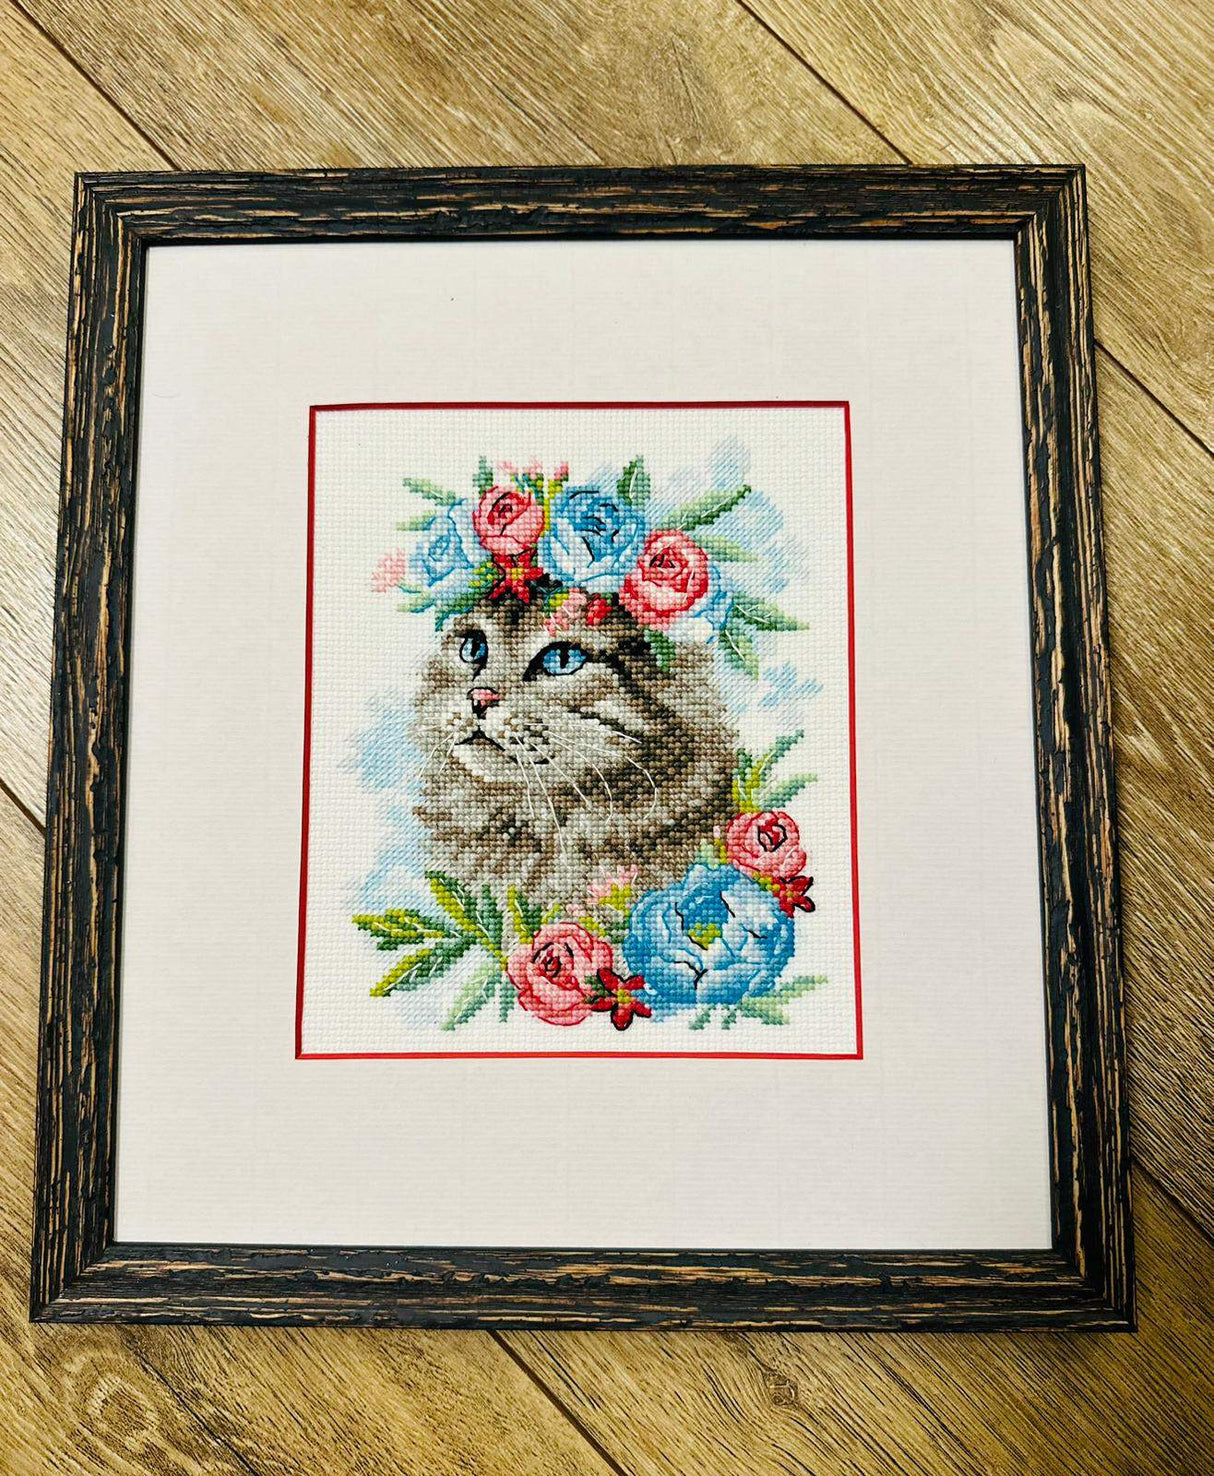 Cross Stitch Embroidery Kit - "Cat in Flowers" - Riolis 2088